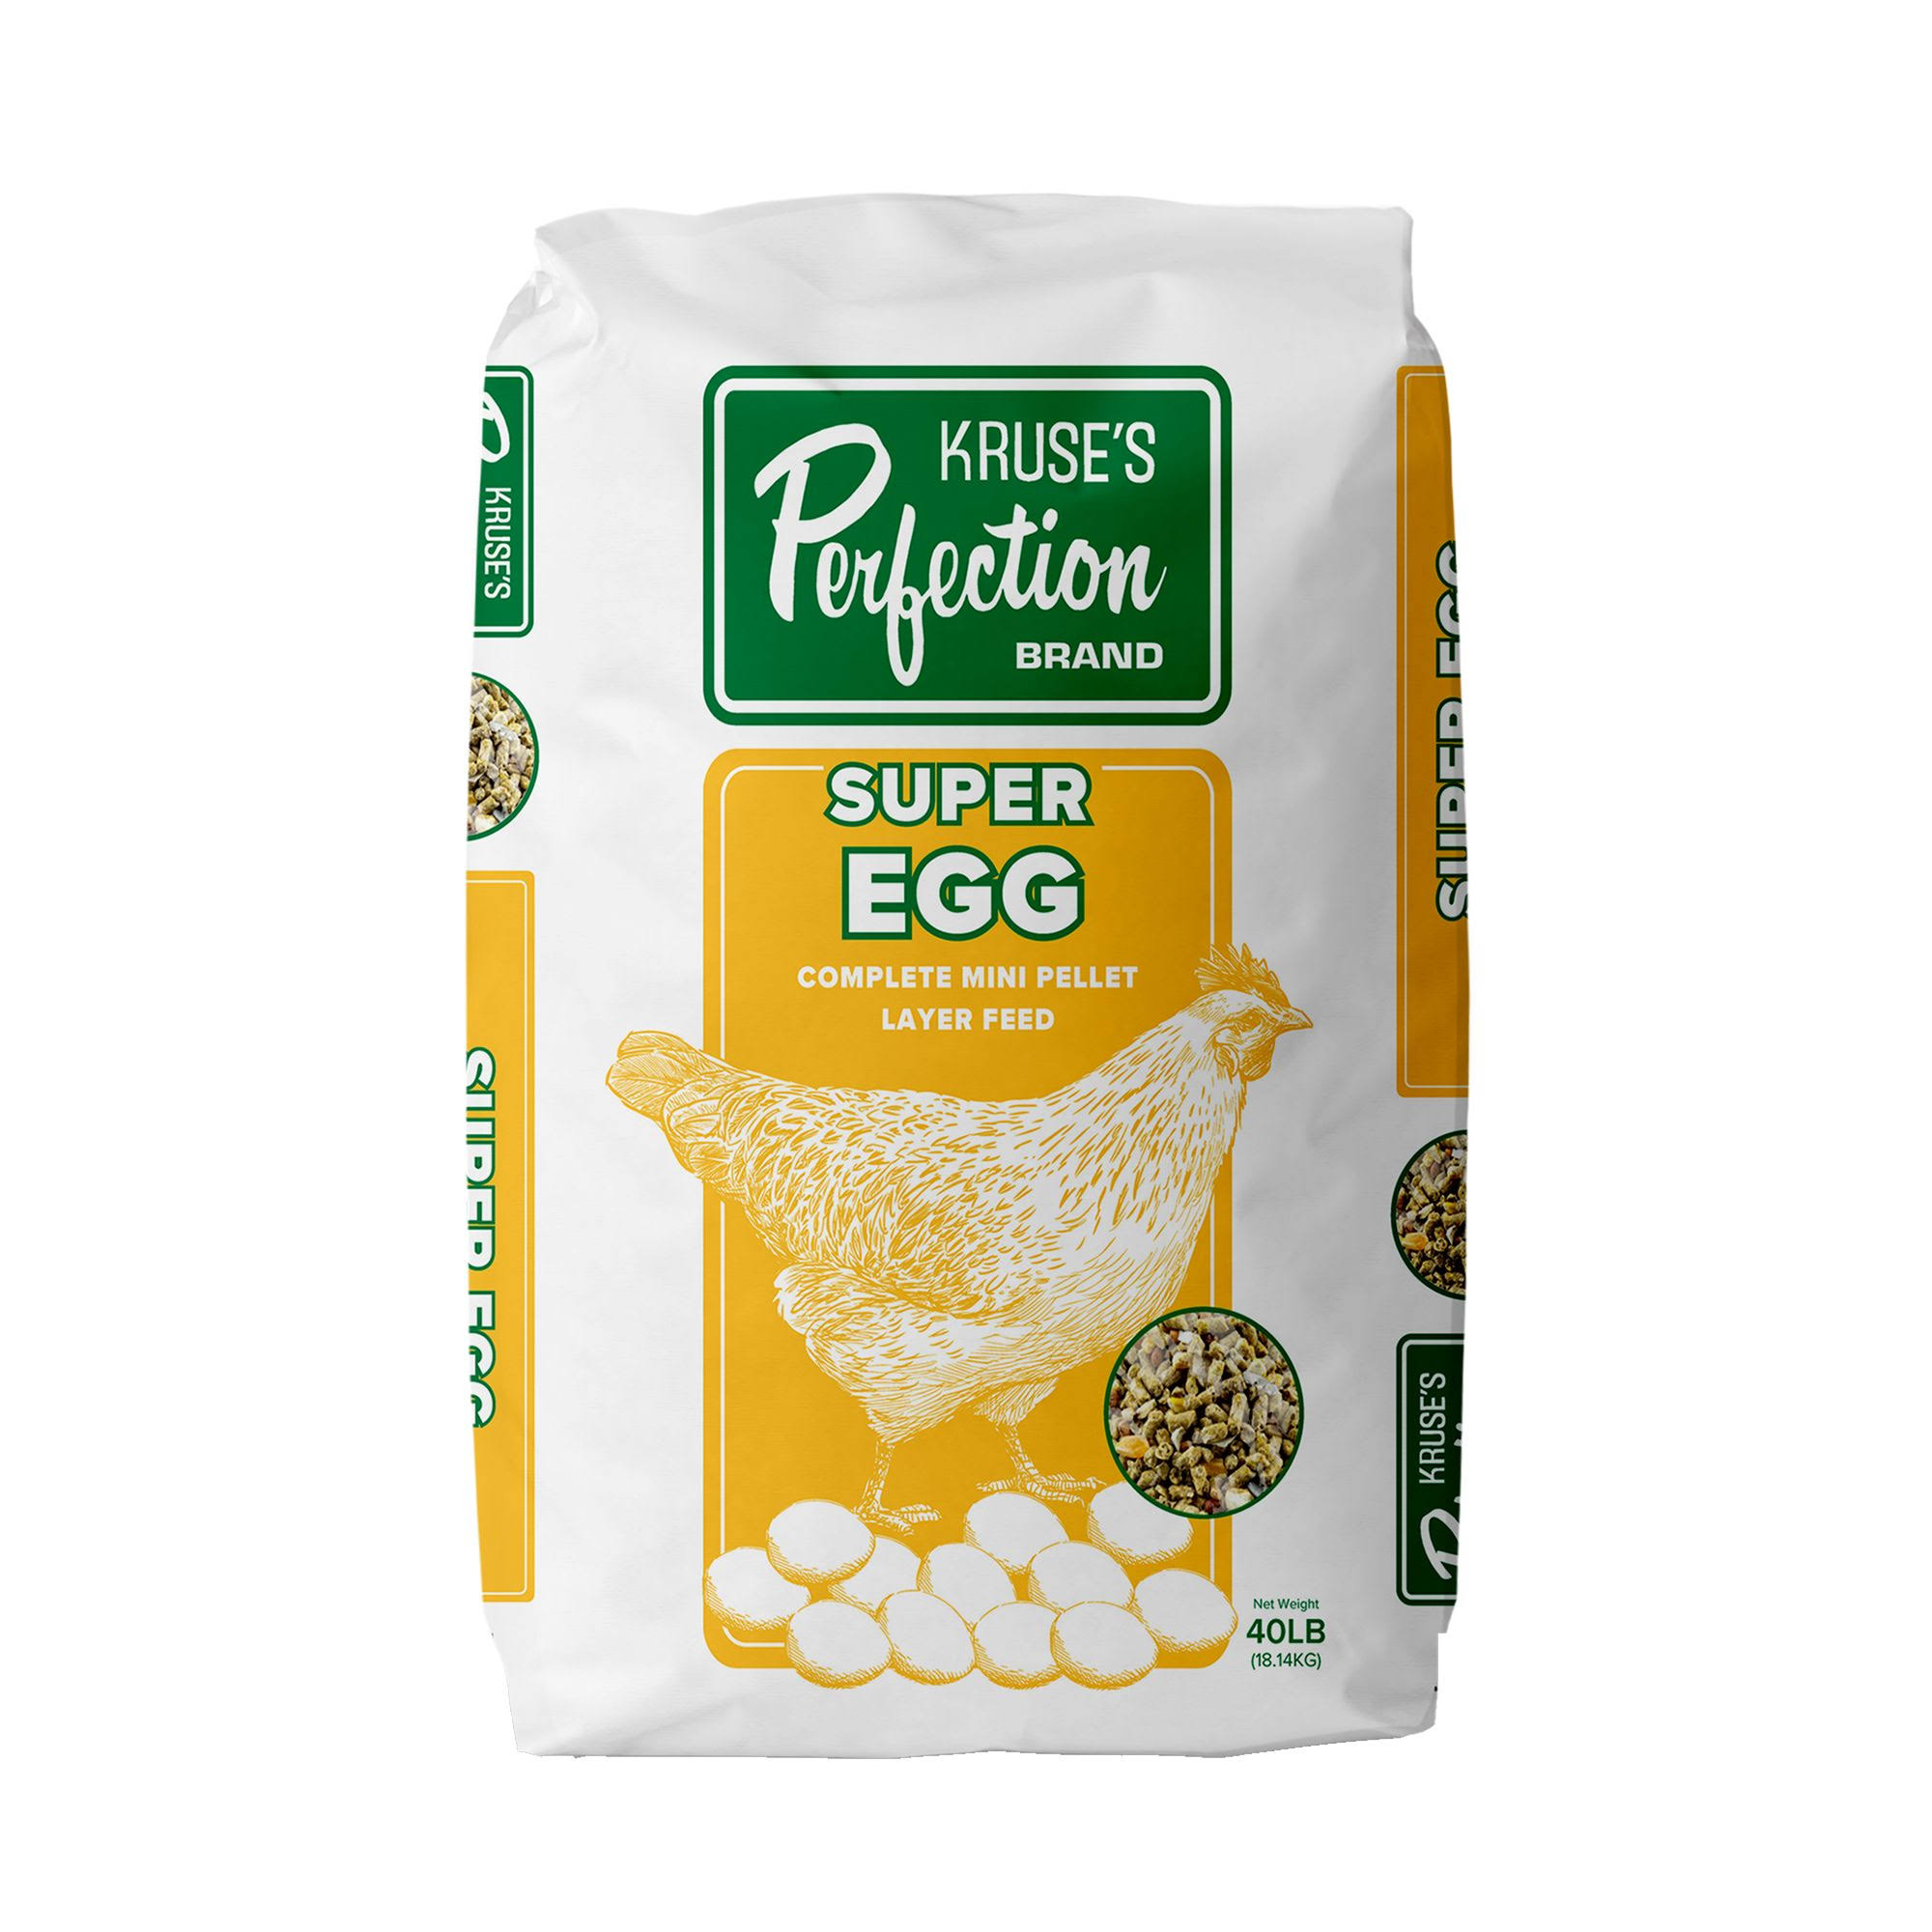 Kruse's Perfection Brand Super Egg Complete Whole Grains Chicken Feed, 40-lb Bag